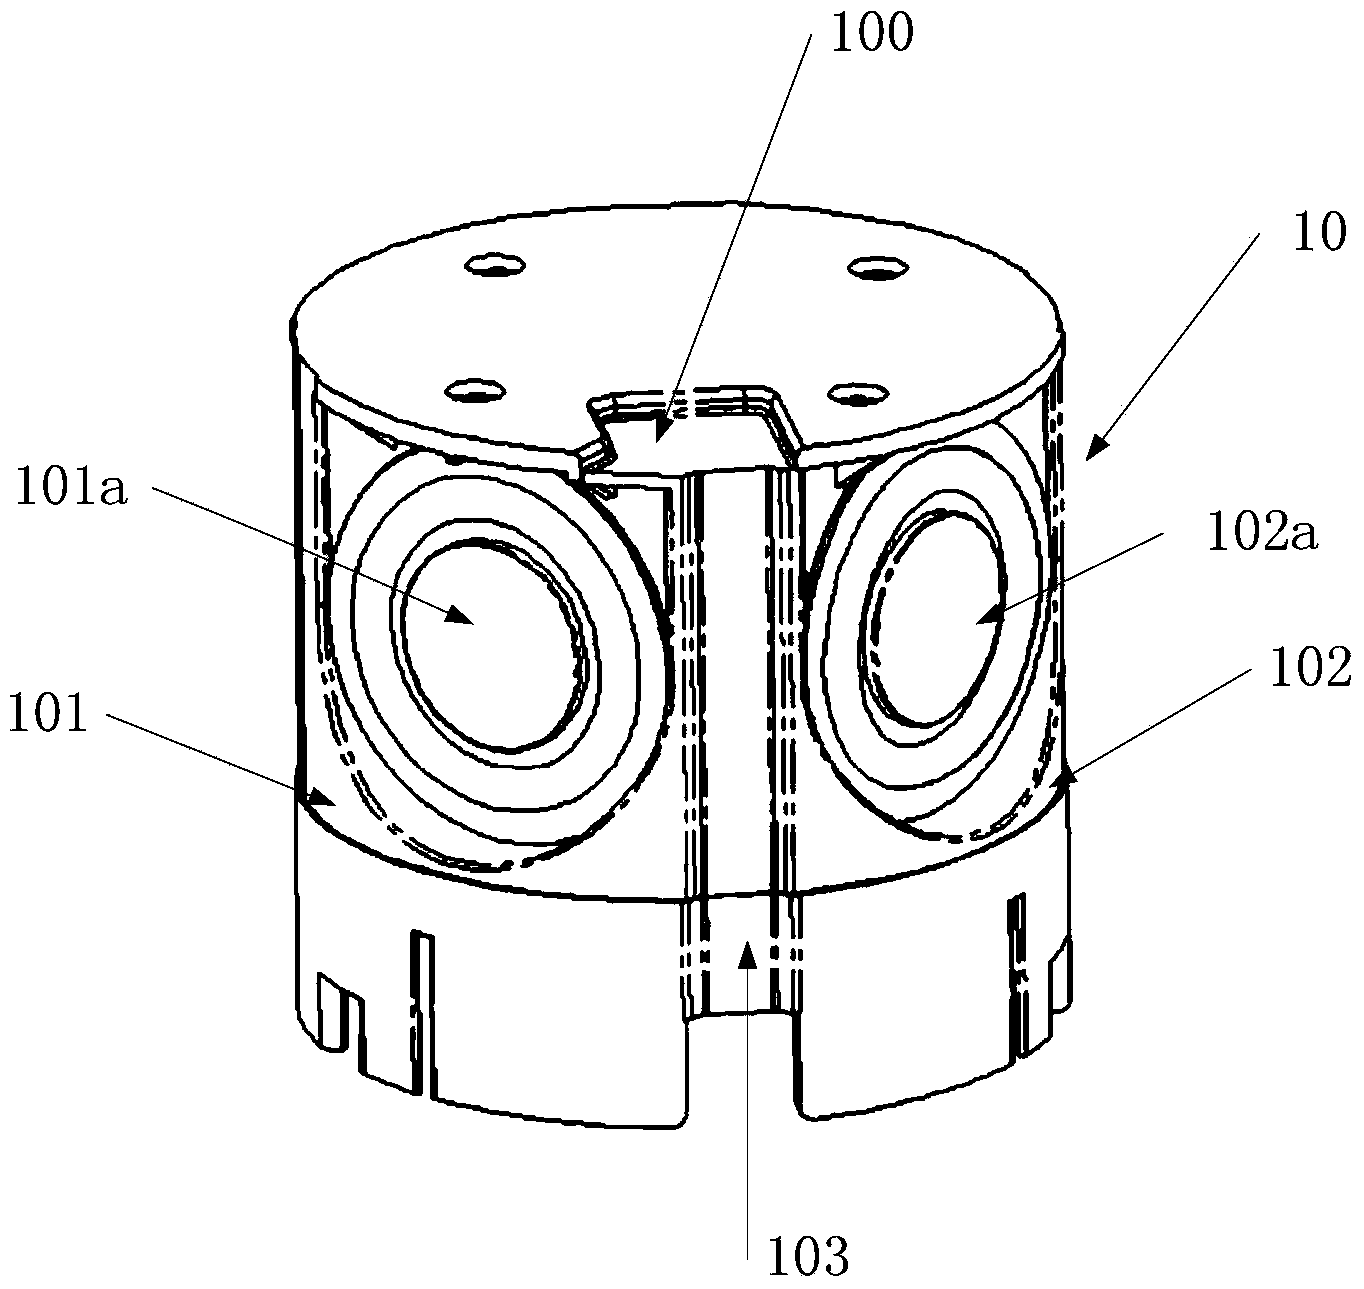 Vocal cavity device and voice box